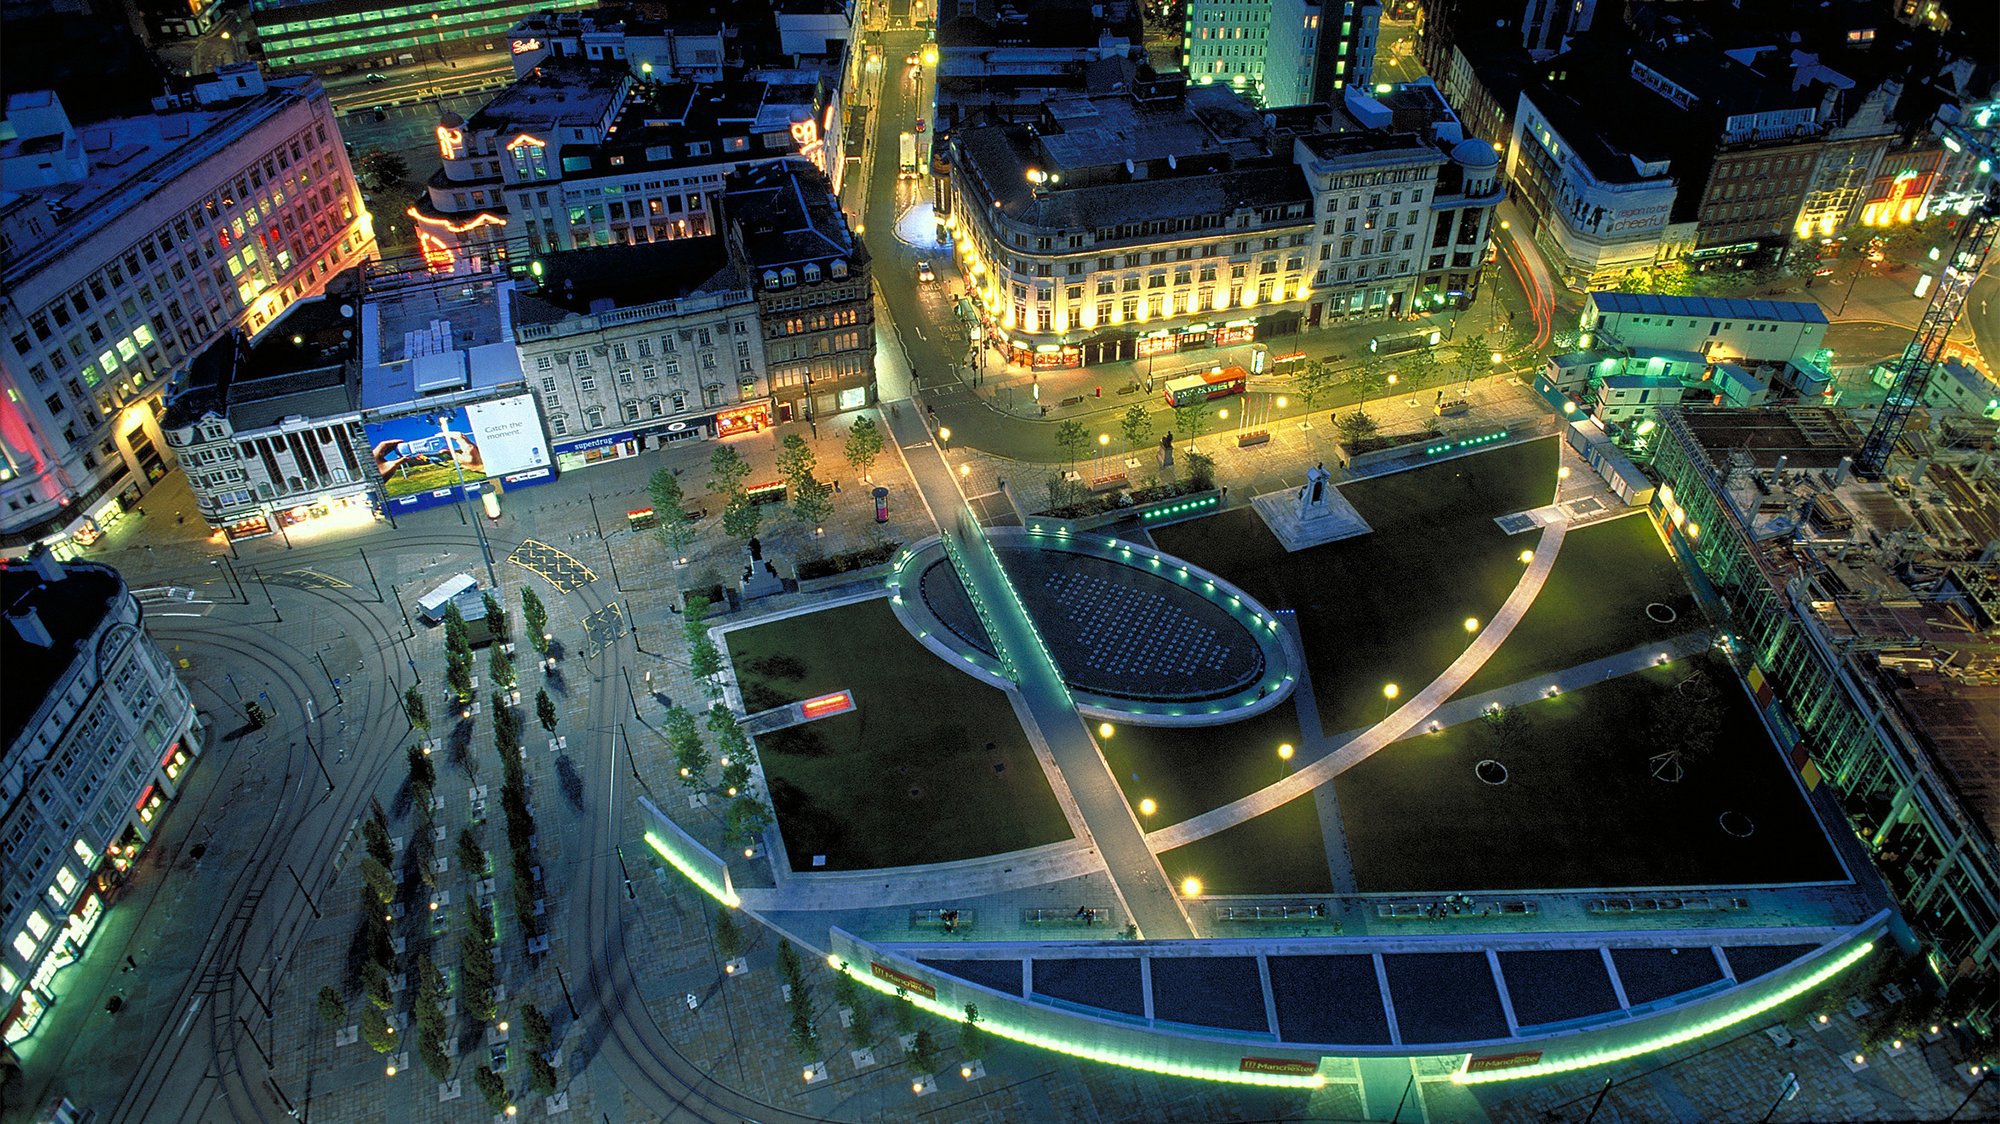 Piccadilly Gardens Regeneration in the heart of Manchester. Photo: Dixi Carrillo